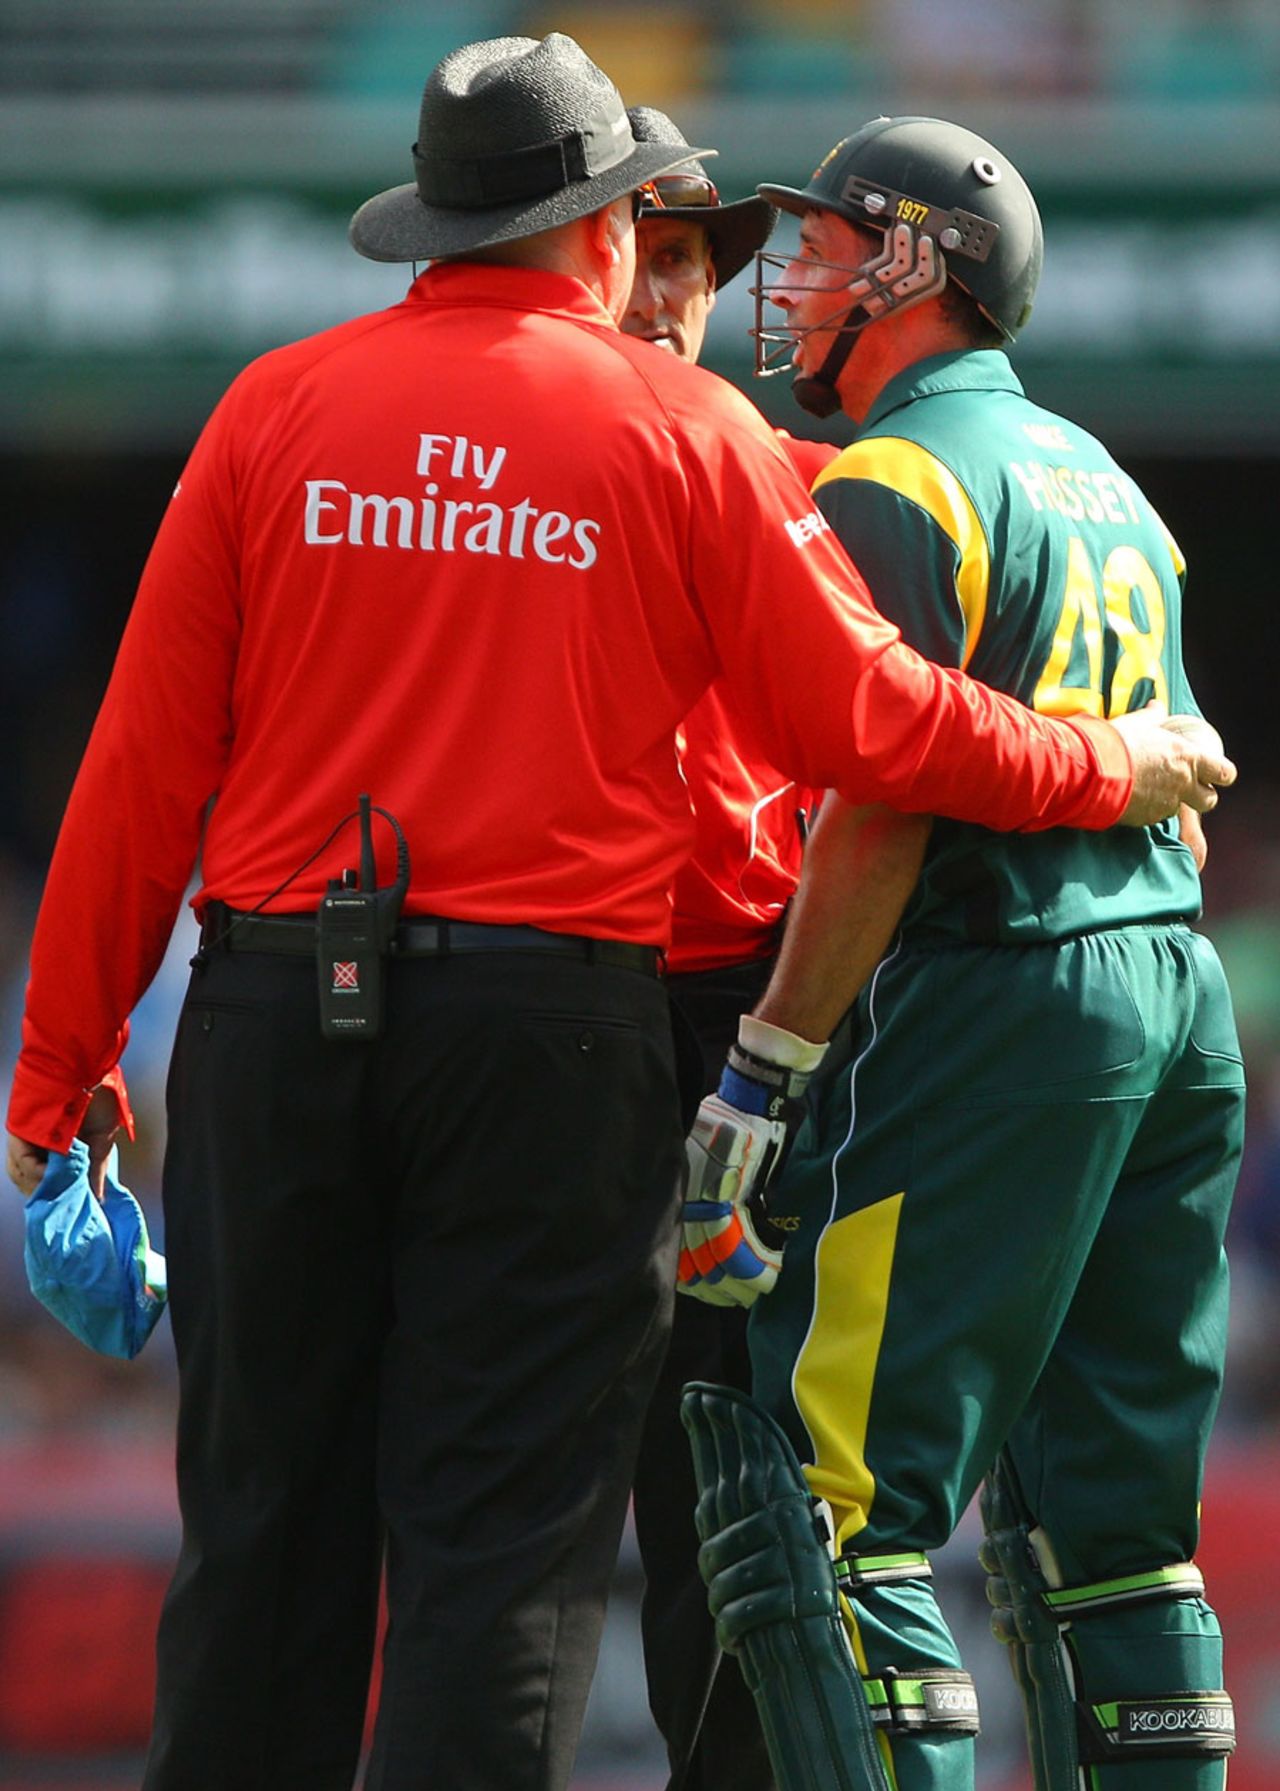 Michael Hussey is recalled after being wrongly adjudged stumped by the third umpire Bruce Oxenford, Australia v India, CB Series, Brisbane, February 19, 2012